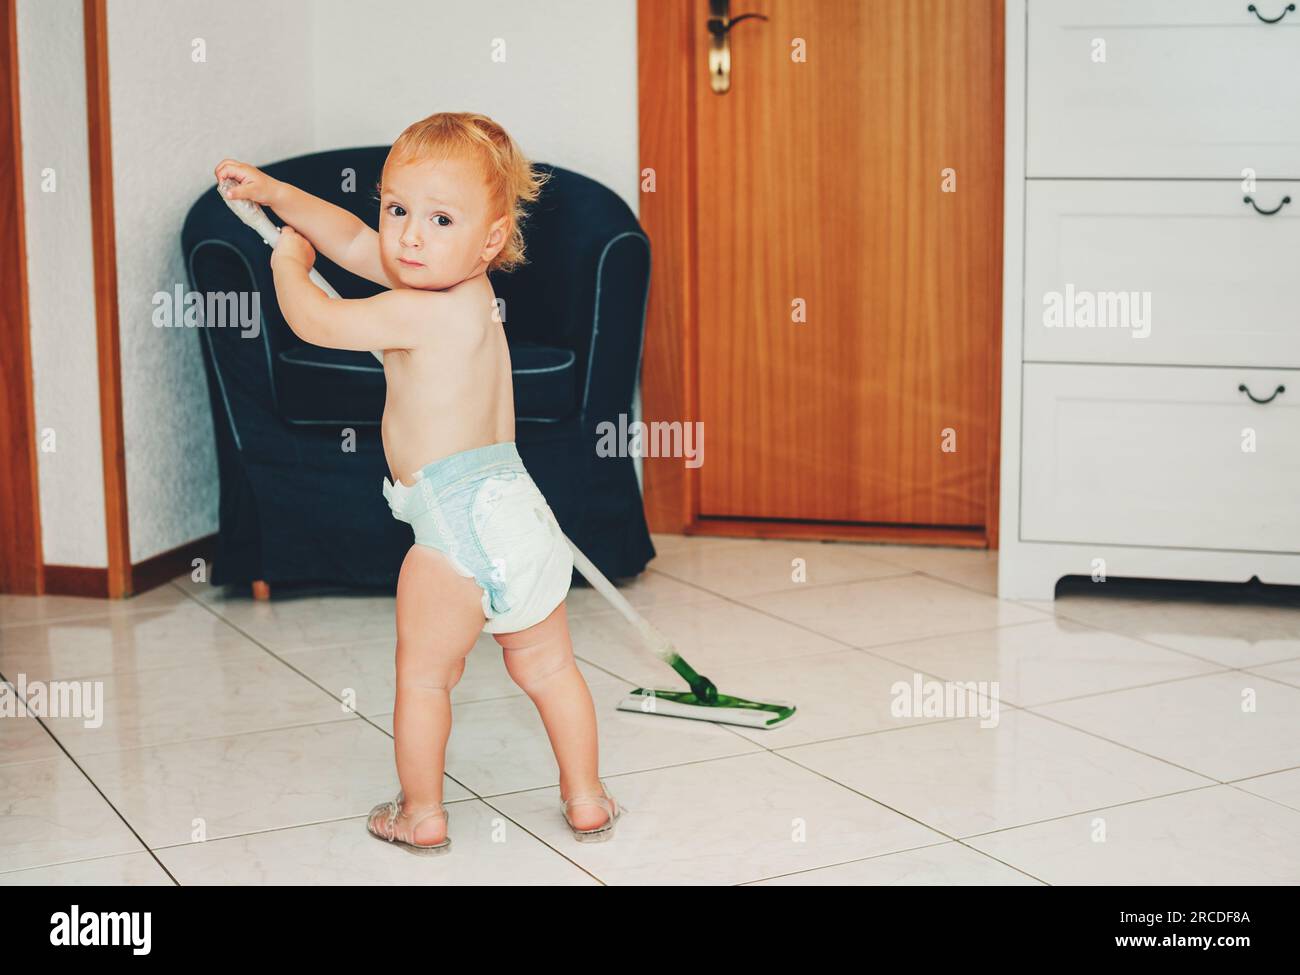 Adorable 1 year old baby boy helping with cleaning, looking back over the shoulder, wearing diaper, holding a mop Stock Photo